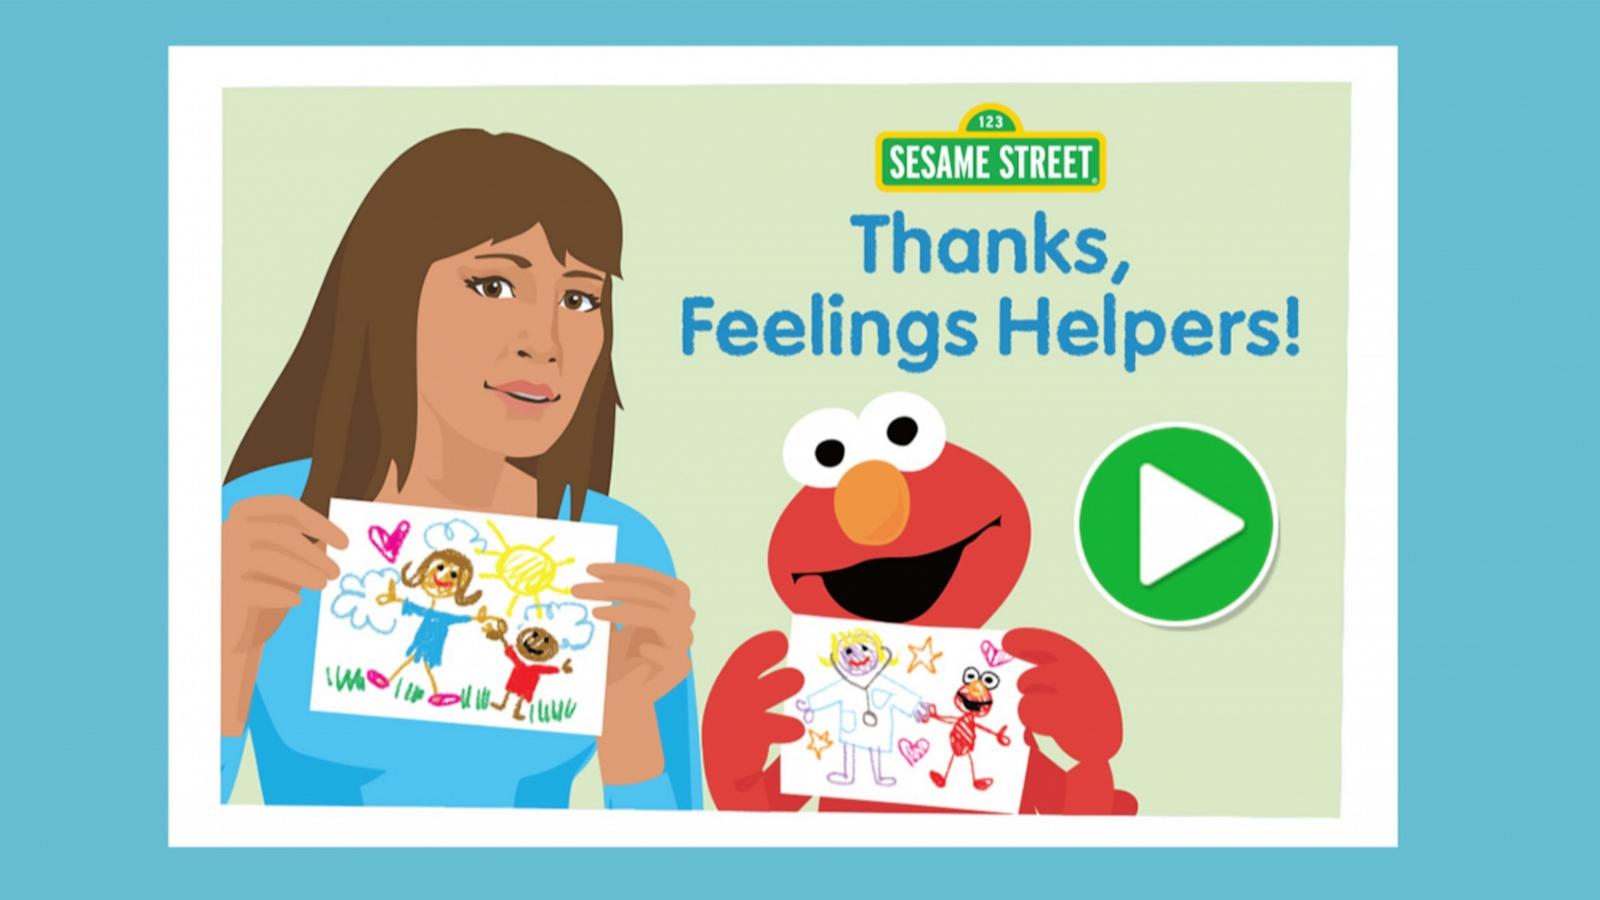 PHOTO: Launched on May 1, the new initiative by Sesame workshop offered new emotional wellbeing resources with hands-on strategies aimed for children.